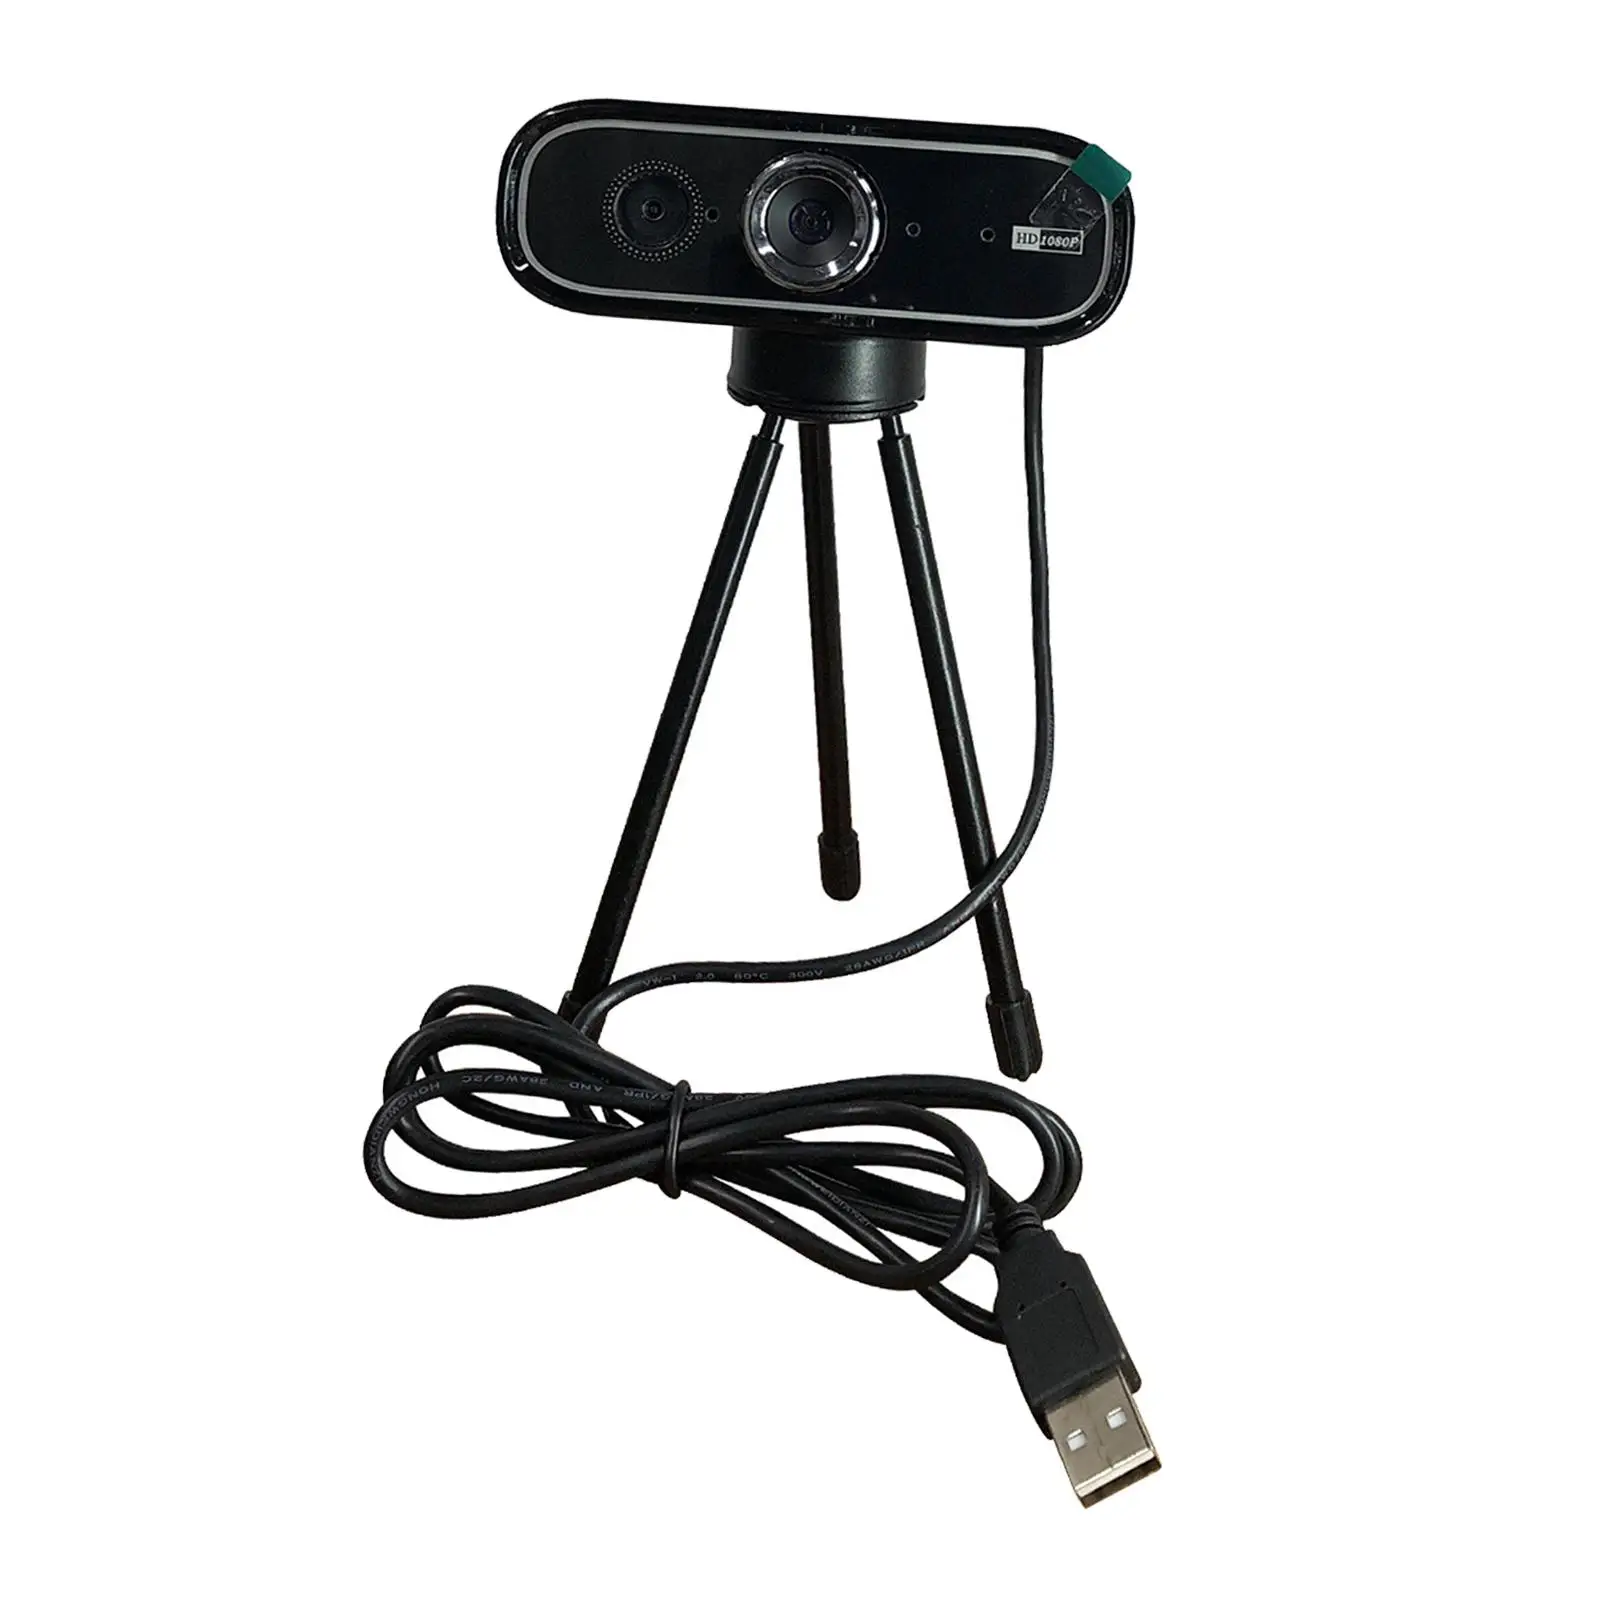 1080P Full USB web camera Cameras Multifunctional Portable Baby Monitor for Conference Meeting Video Call Live stream Desktop